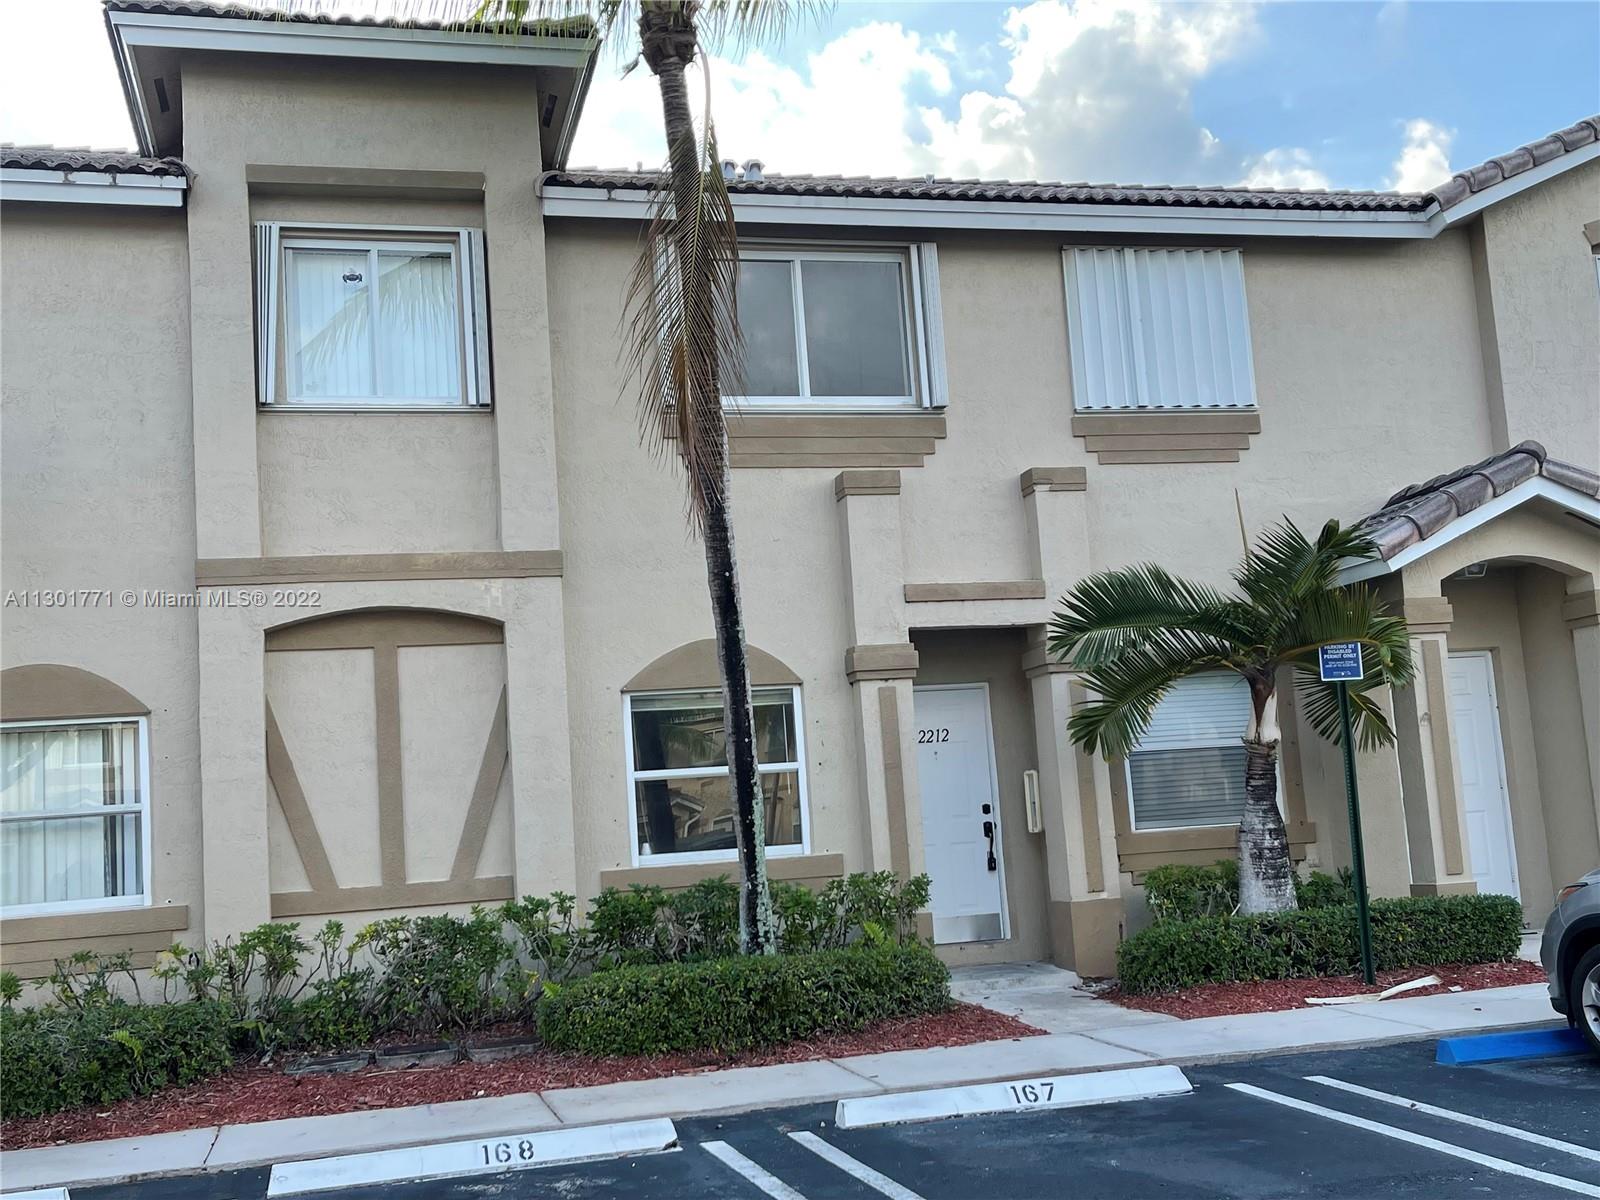 SPACIOUS 3 BR/ 2.5 BA TOWNHOME IN DESIRABLE TOWN GATE COMMUNITY AT KEYS GATE, TILE ON 1ST FLOOR, SEPARATE LIVING & DINING AREA, LARGE MASTER BEDROOM AND FENCED IN PATIO. RENT INCLUDES: BASIC ATT UVERSE CABLE & INTERNET, ALARM MONITORING, EXTERMINATOR, ROVING SECURITY, COMMUNITY POOL.